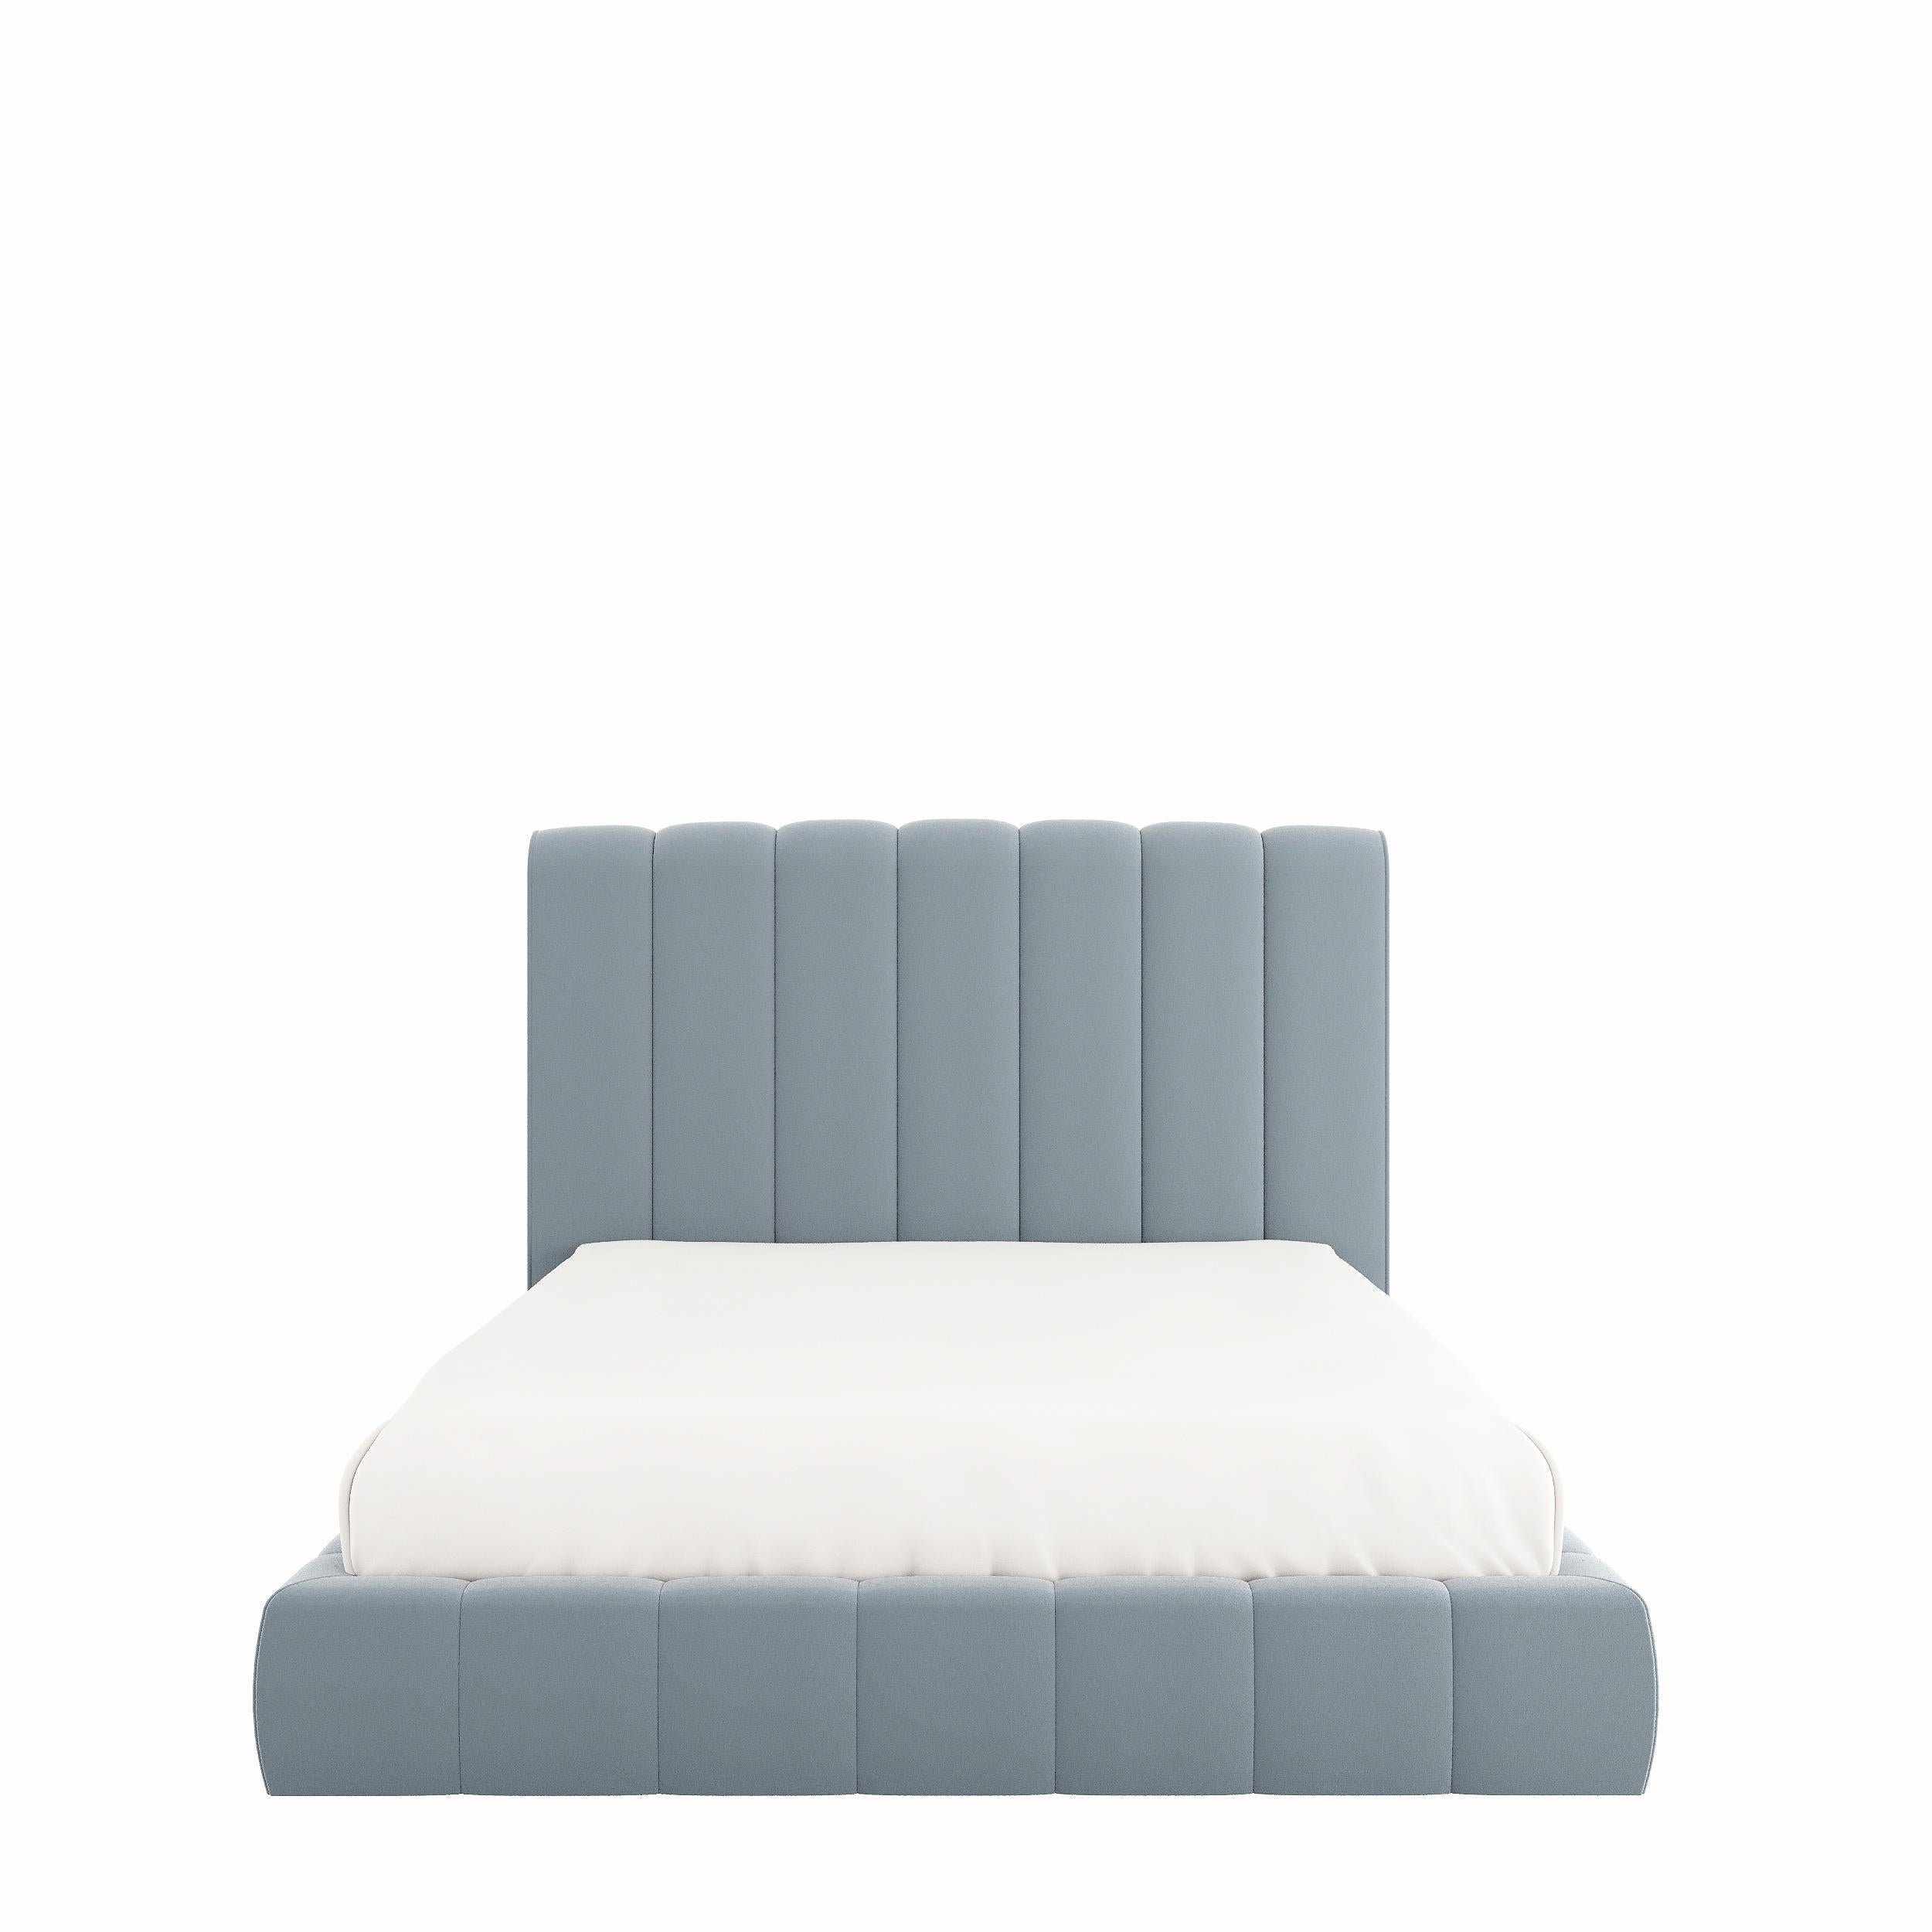 Contemporary BRISA bed with upholstered headboard and base For Sale